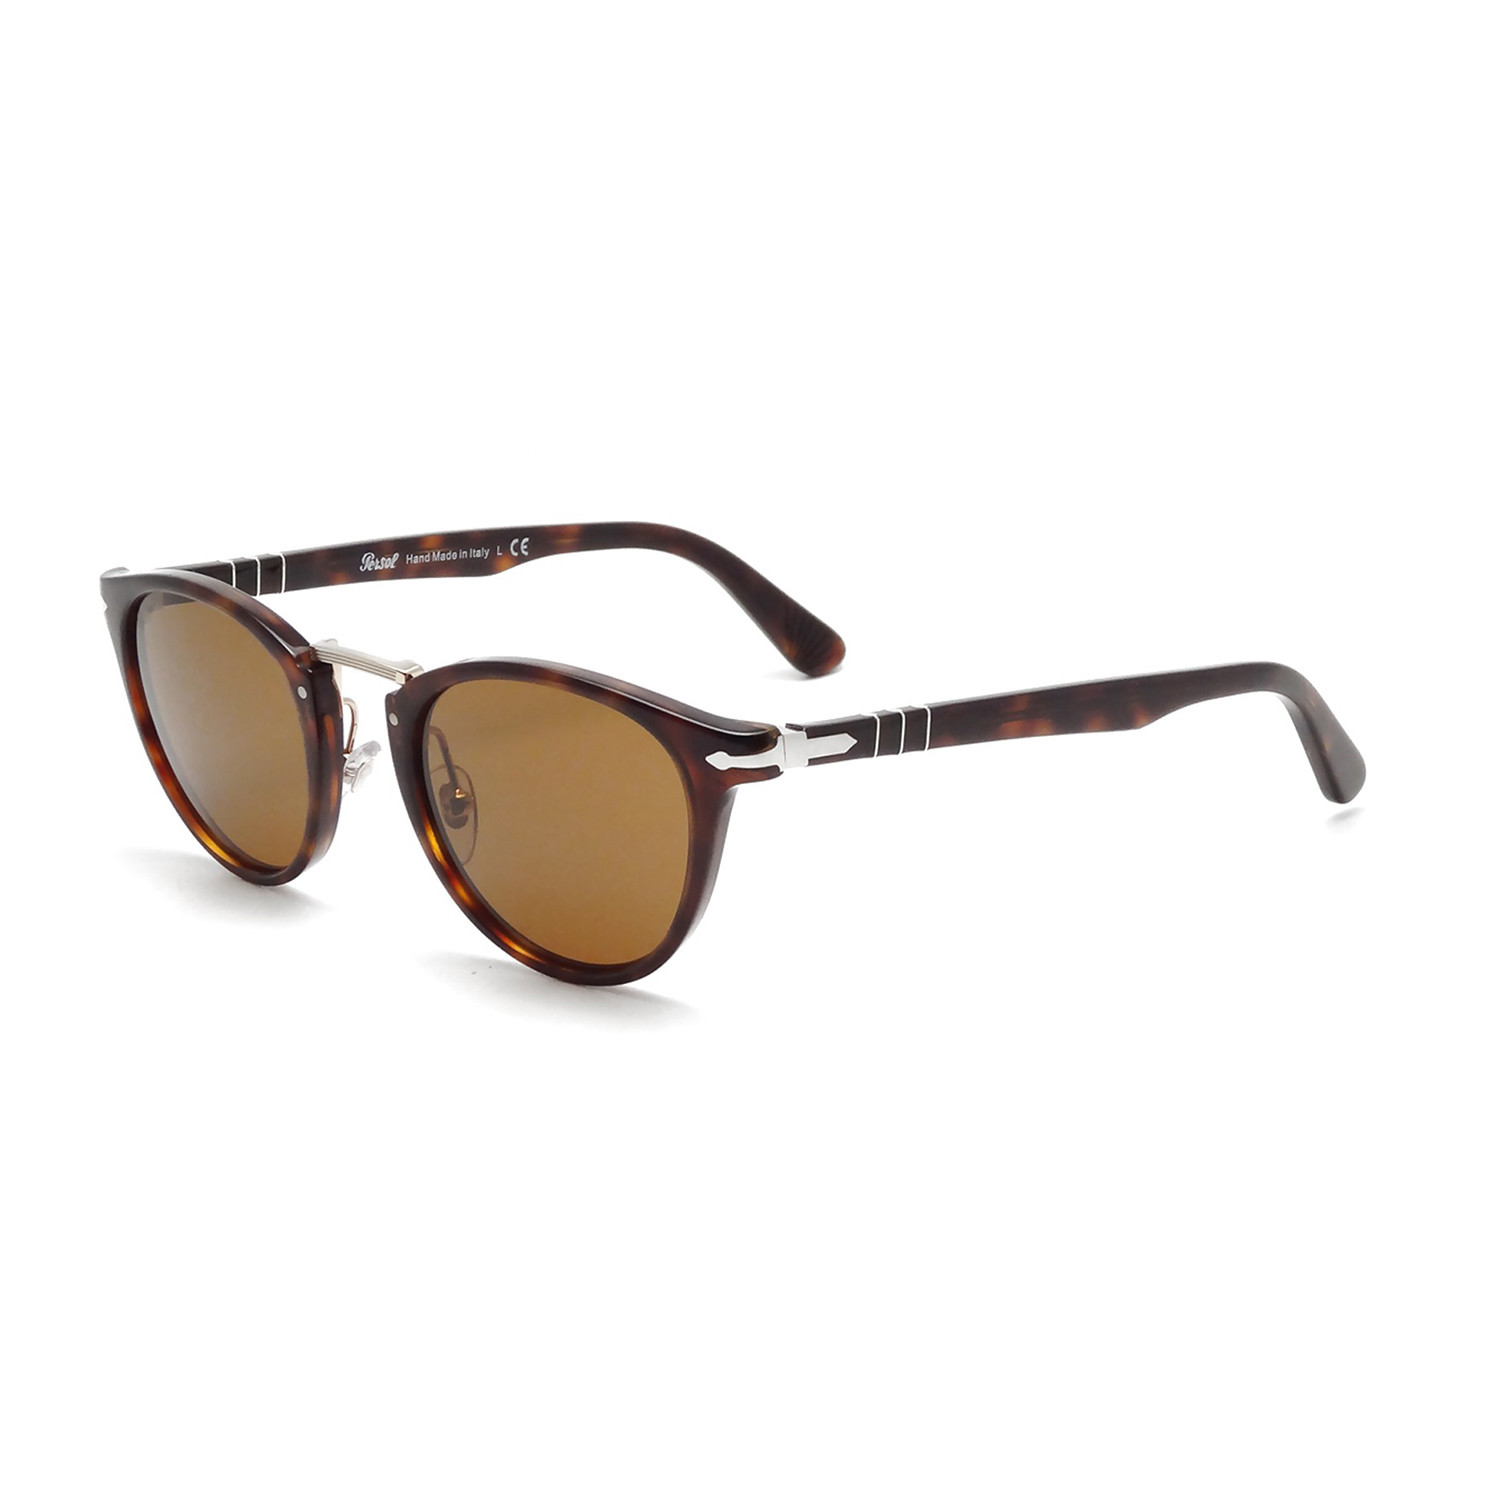 Persol Acetate Metal Sunglasses Havana Brown Polarized Persol Touch Of Modern